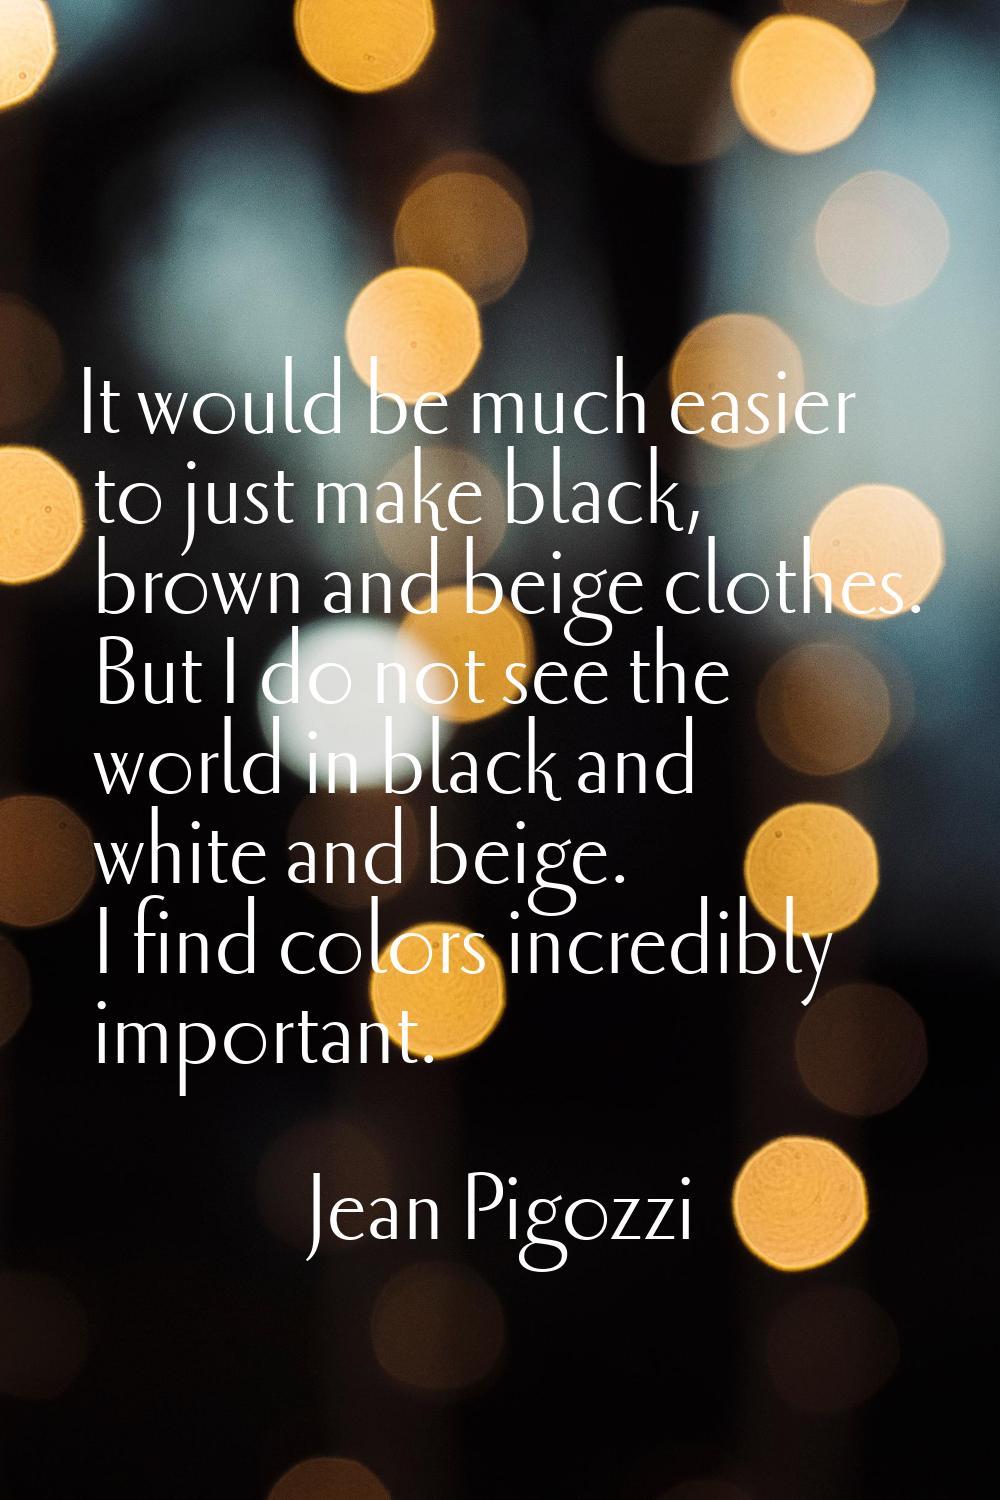 It would be much easier to just make black, brown and beige clothes. But I do not see the world in 